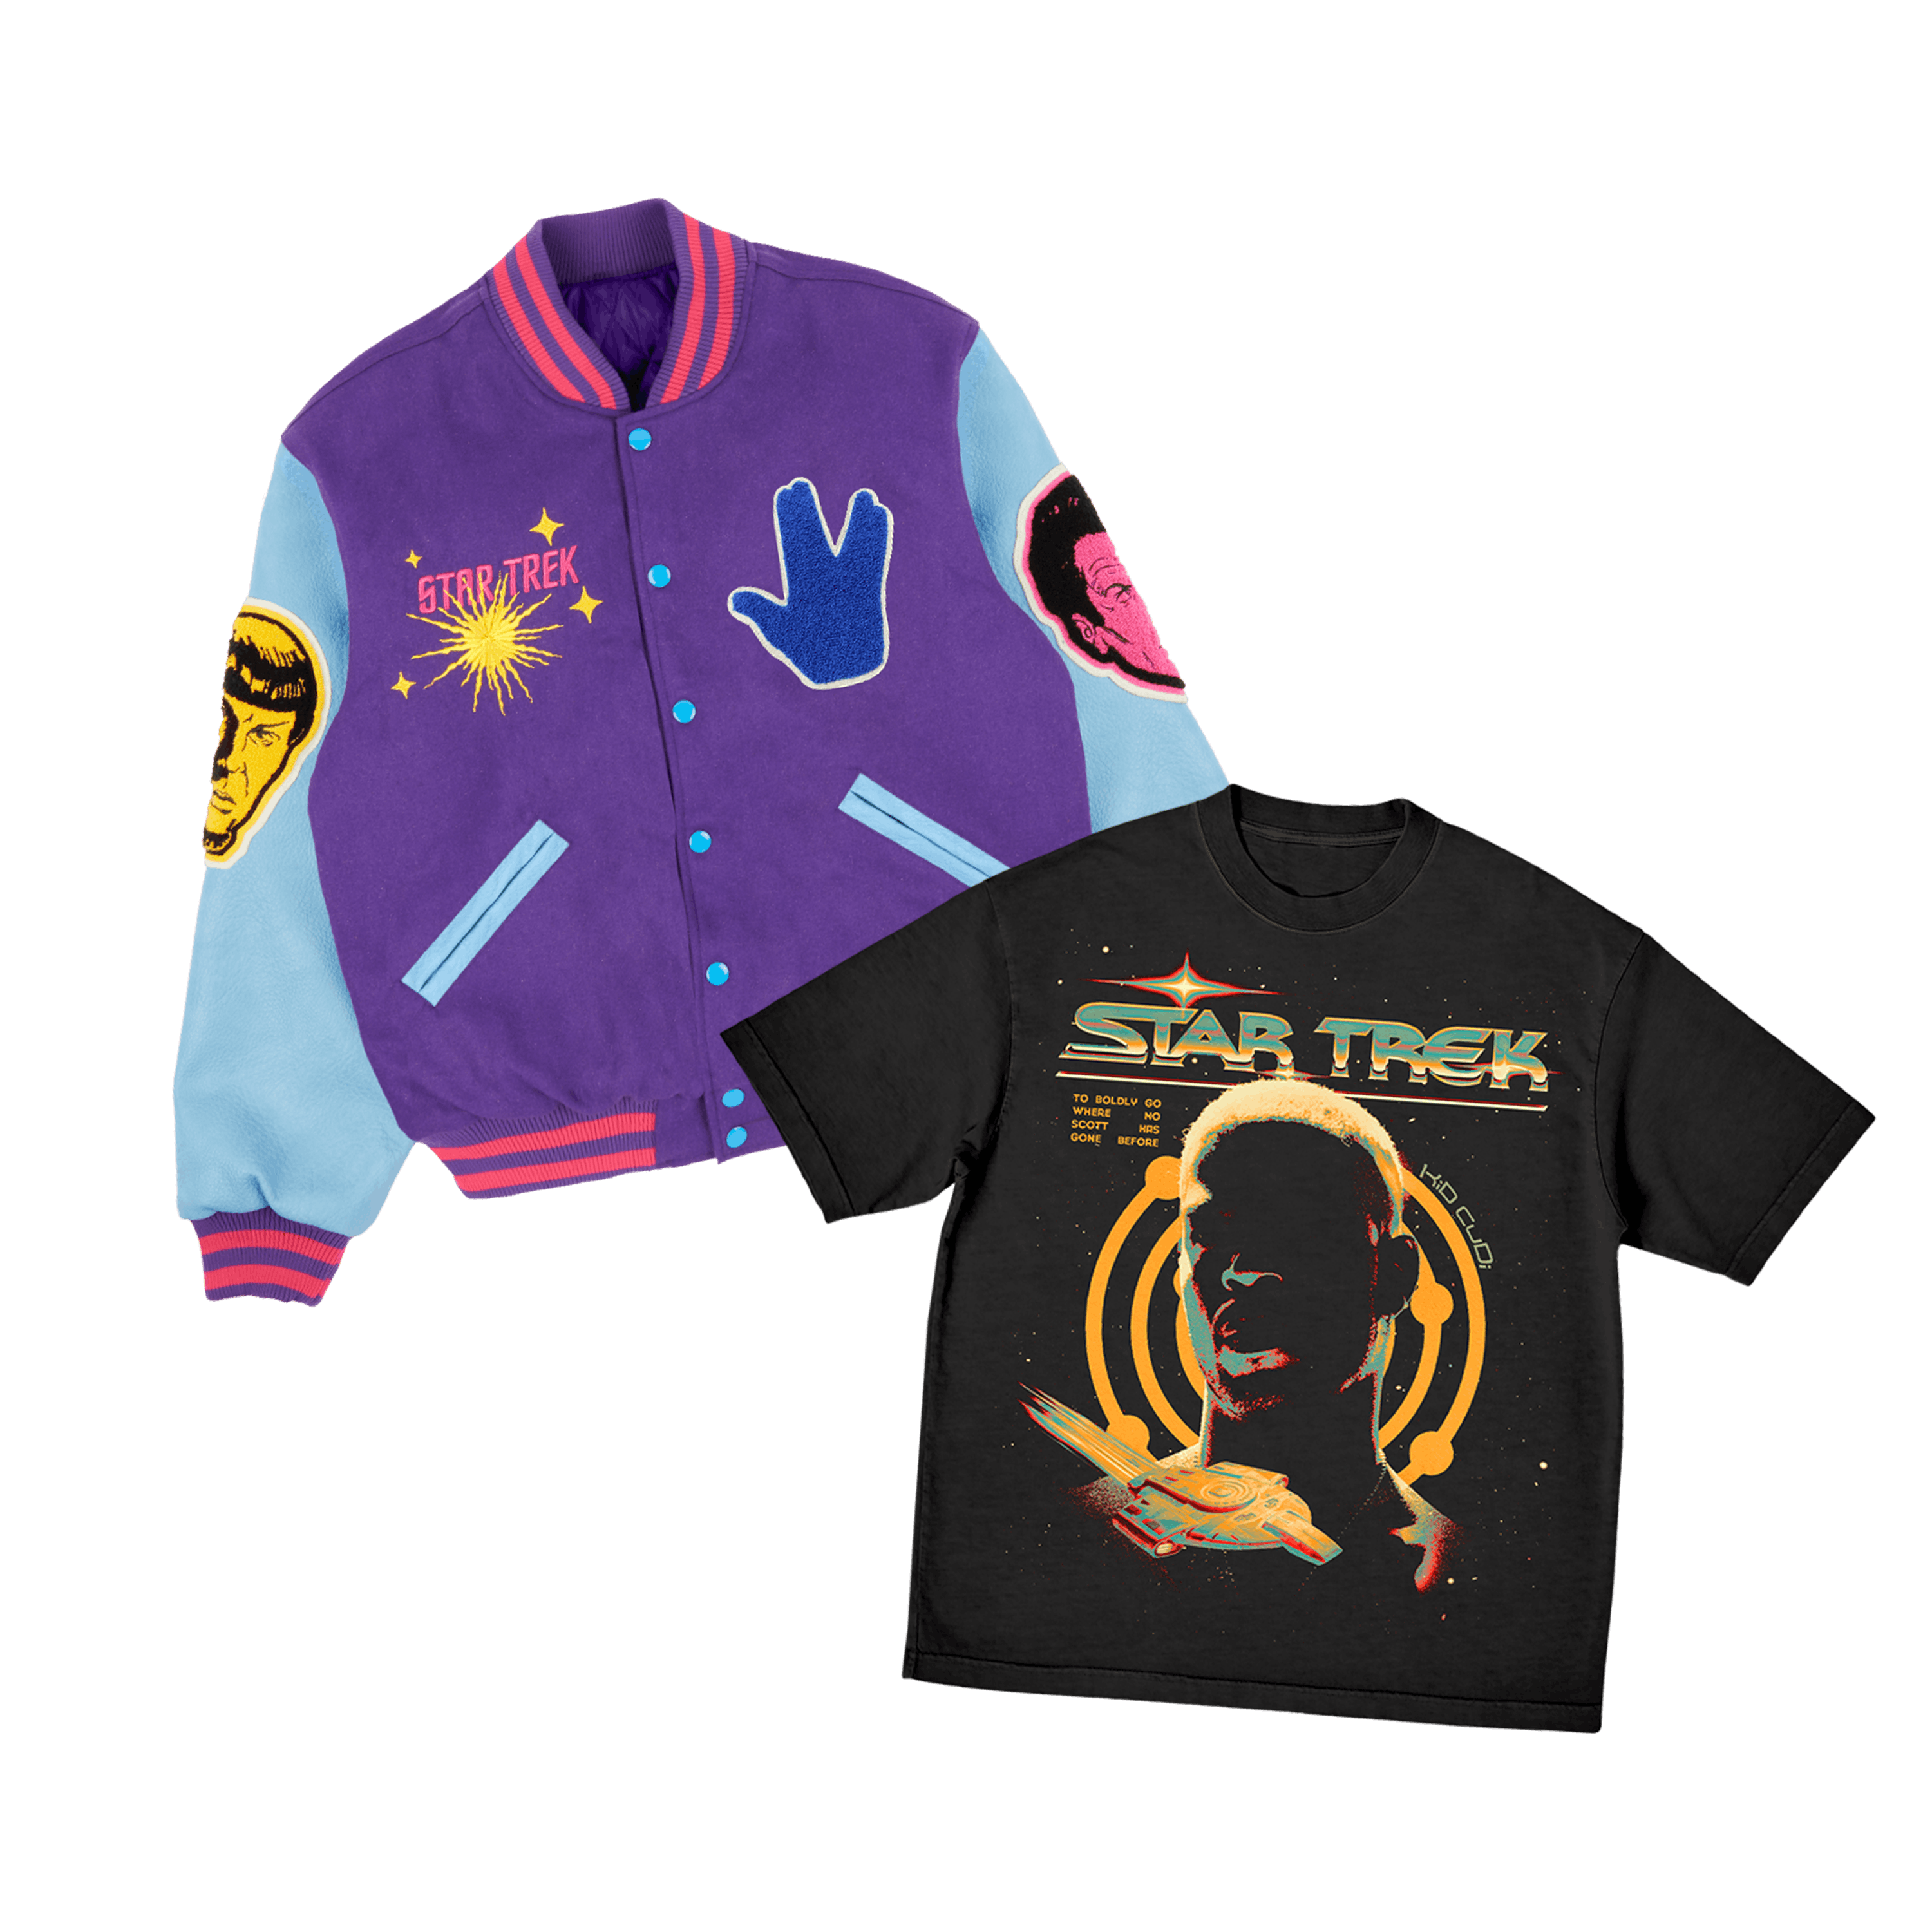 Star Trek x Kid Cudi streetwear collection featuring a colorful letterman jacket and a black tee.